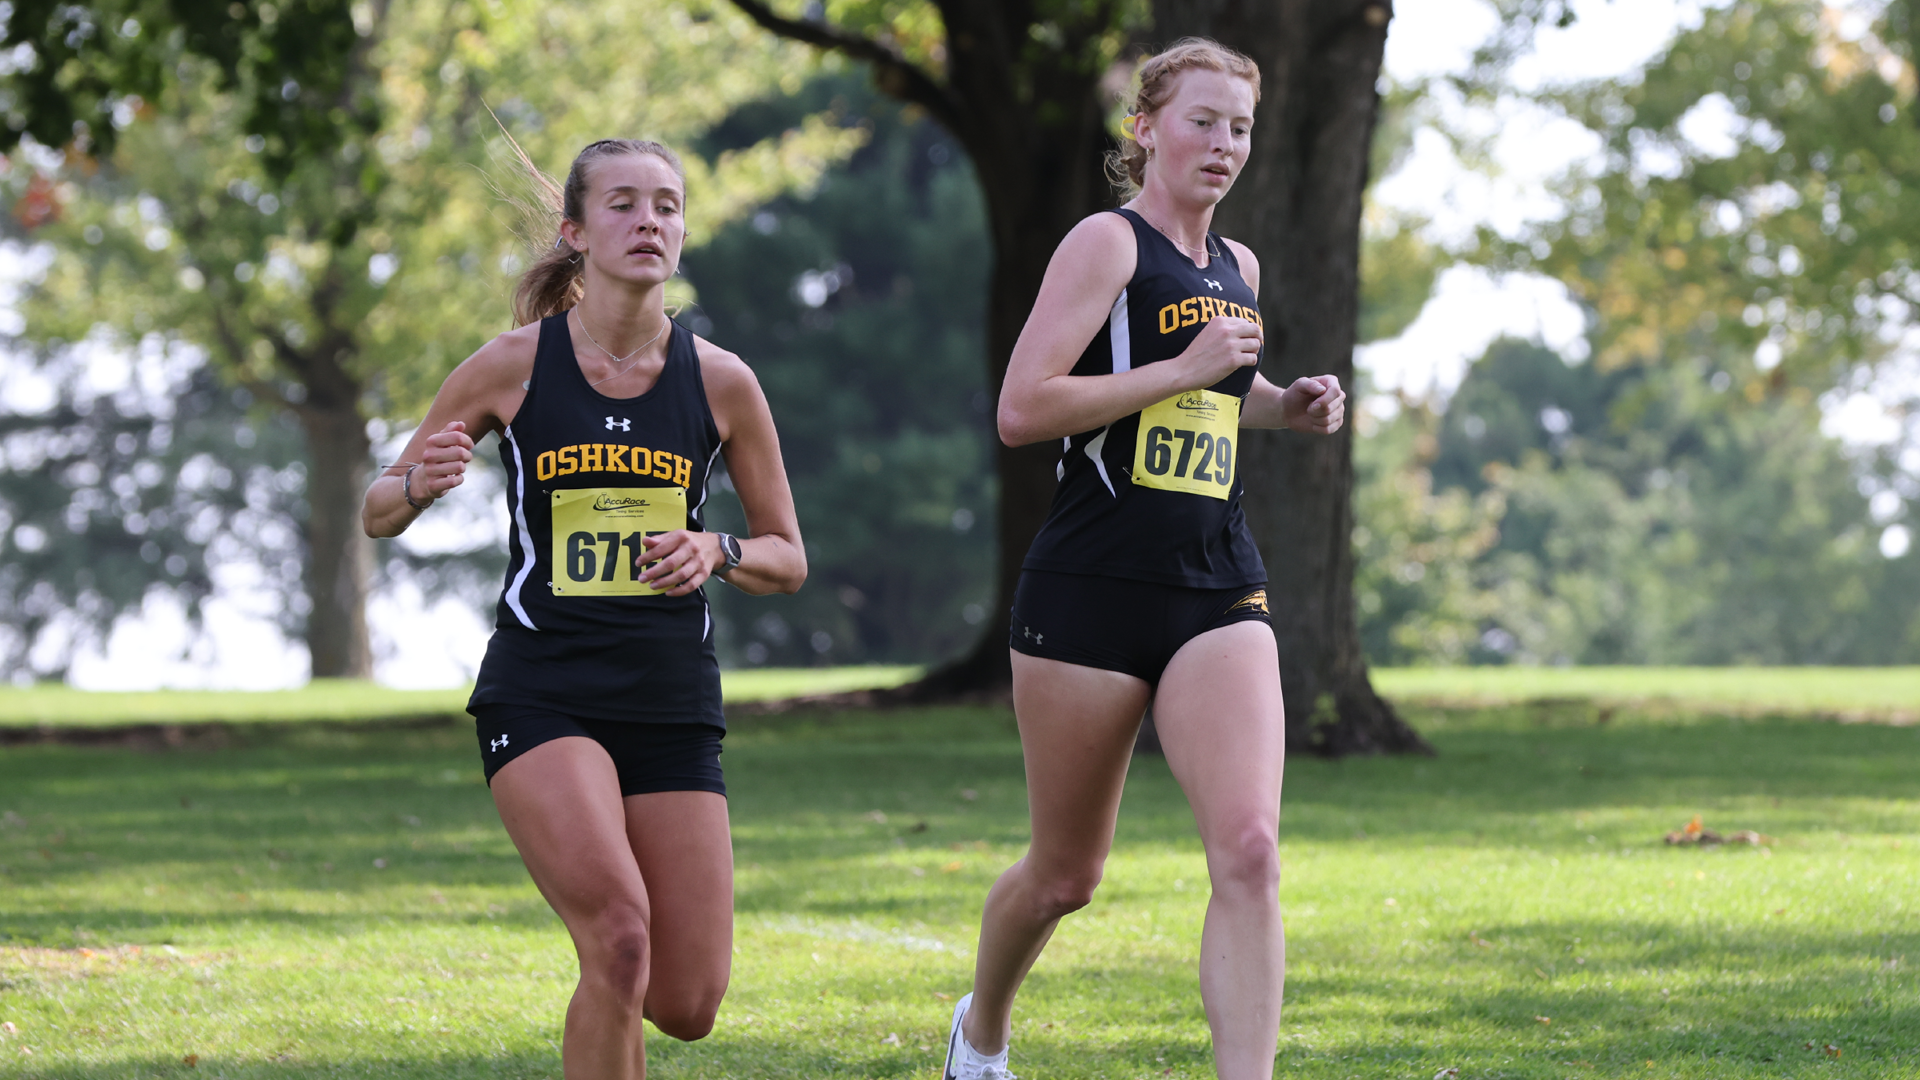 Cyna Madigan ran the Augustana College Interregional in 23:05 for 53rd on Saturday